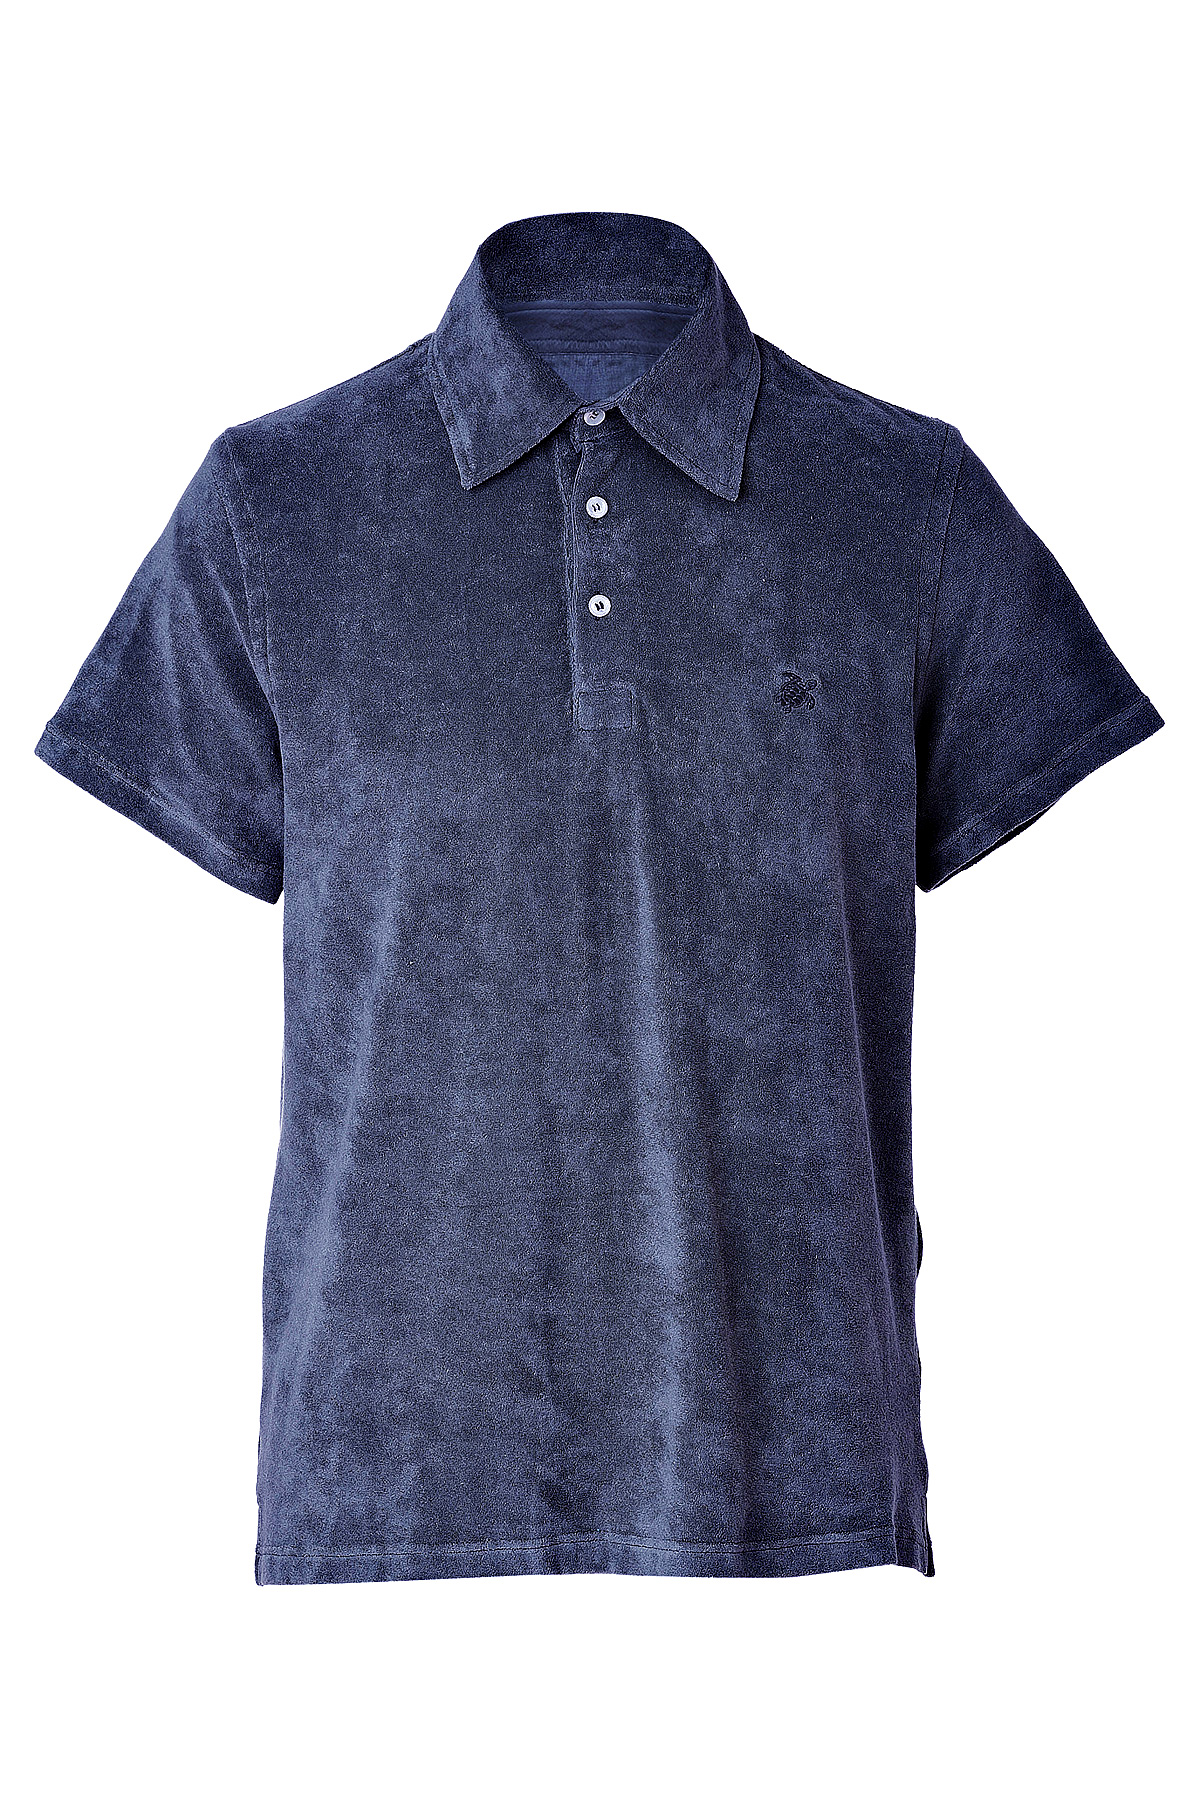 Lyst - Vilebrequin Navy Terry Cloth Polo Shirt in Blue for Men